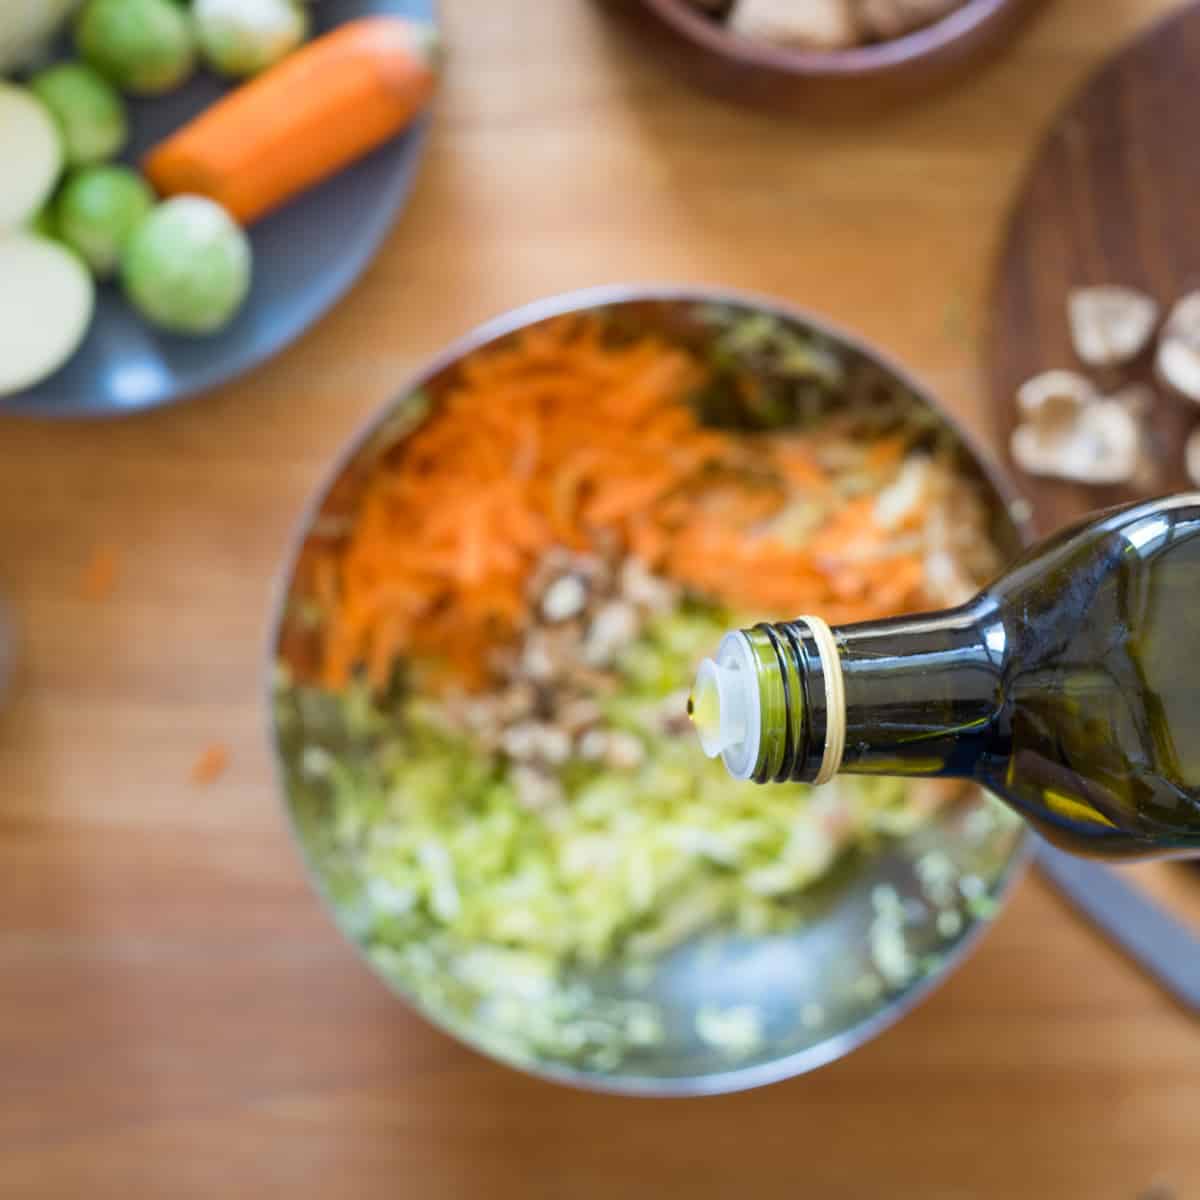 olive oil pouring onto vegetables in bowl